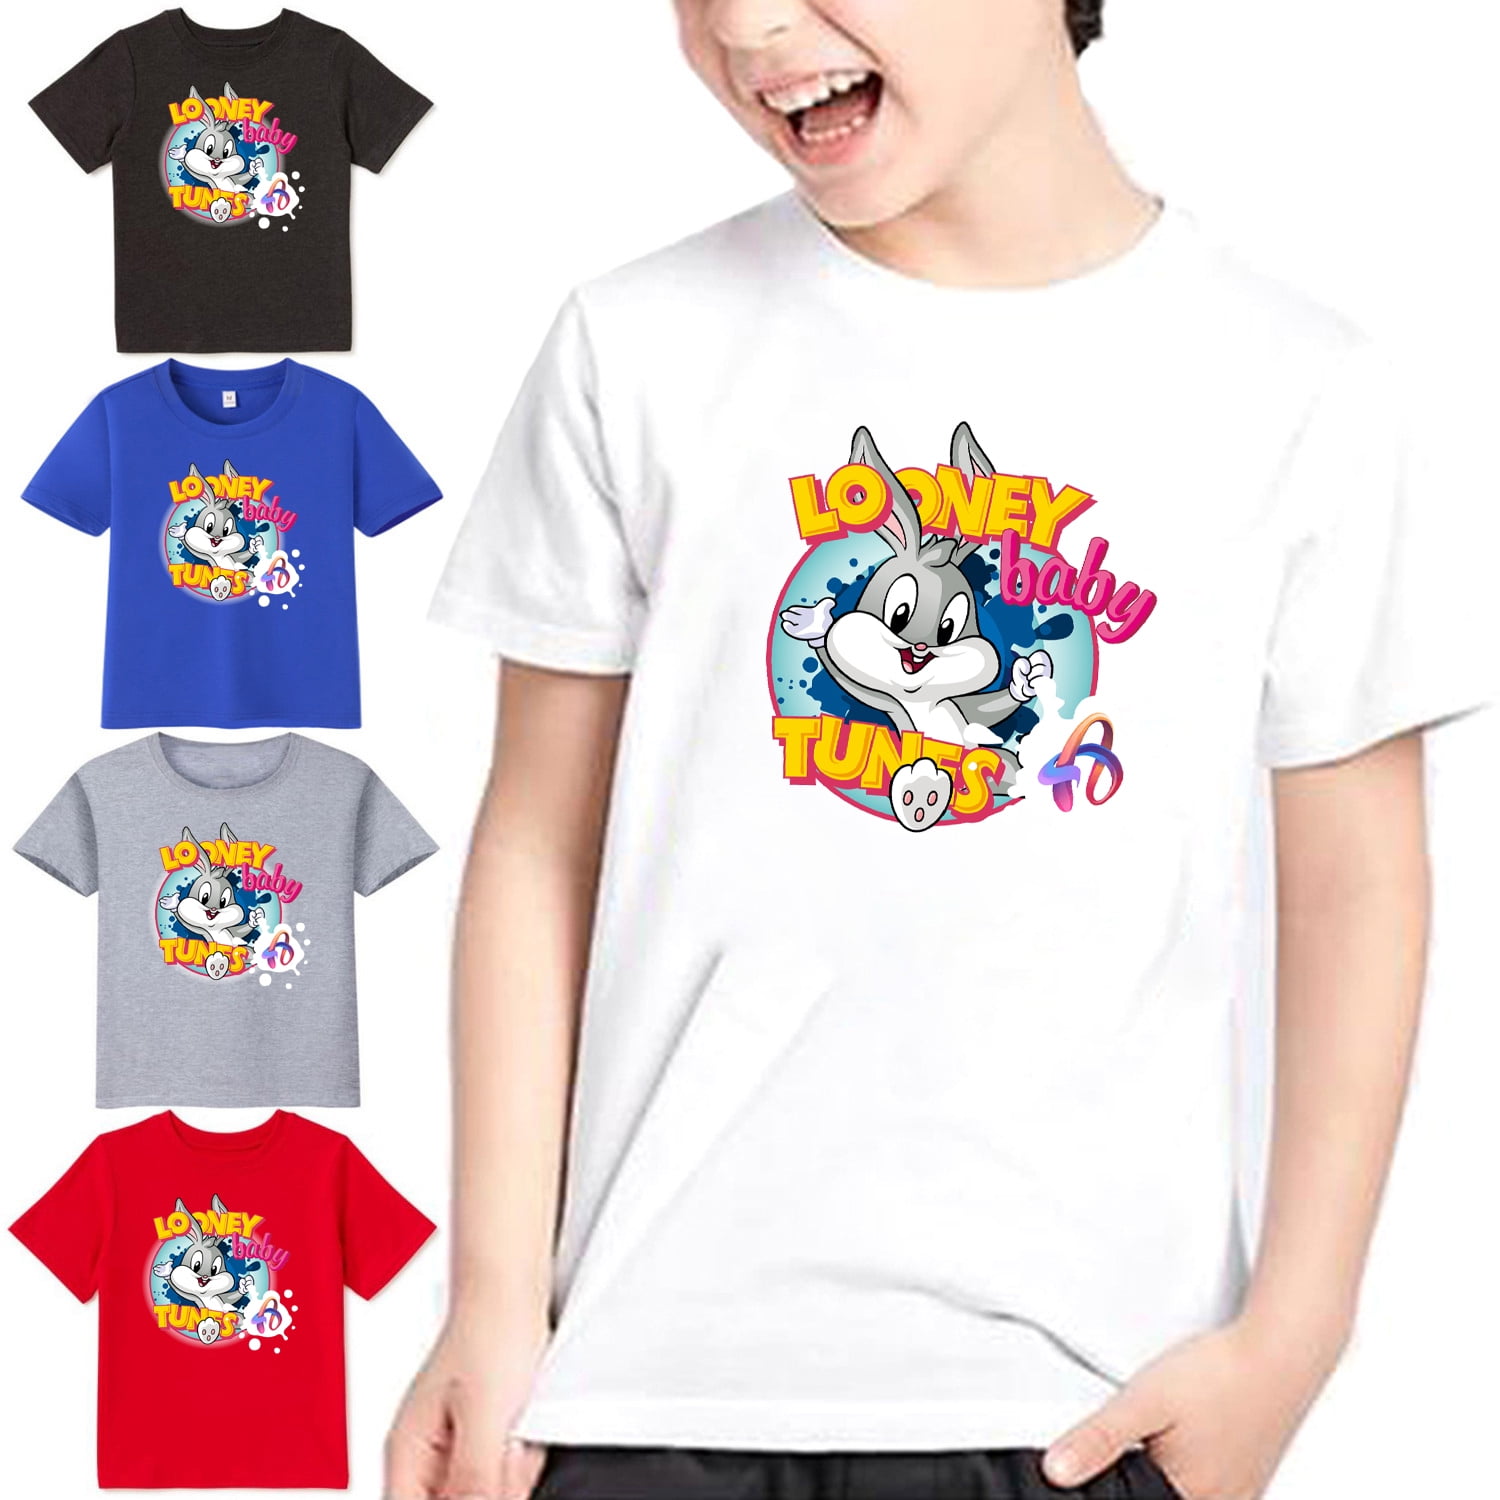 Baby Looney Tunes Tshirt Round Boys Shirts Tee Cute T Sleeve Top for Rabbit Girls Bunny Graphic for Clothes Short Bugs Neck